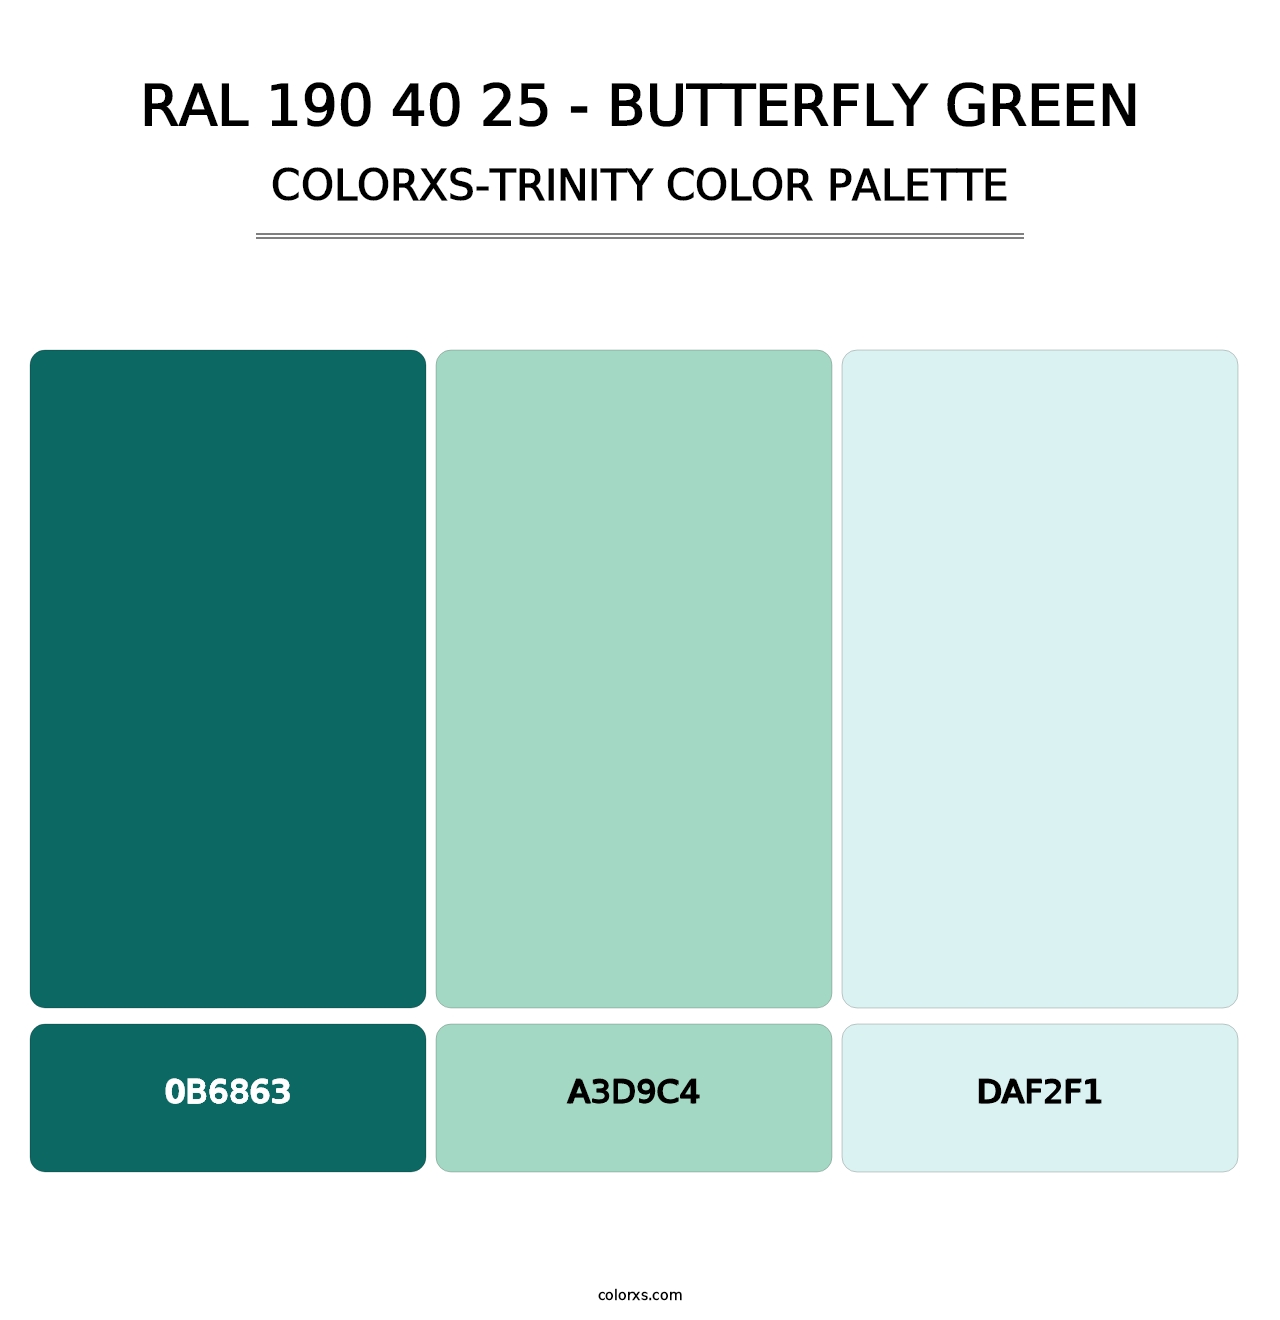 RAL 190 40 25 - Butterfly Green - Colorxs Trinity Palette